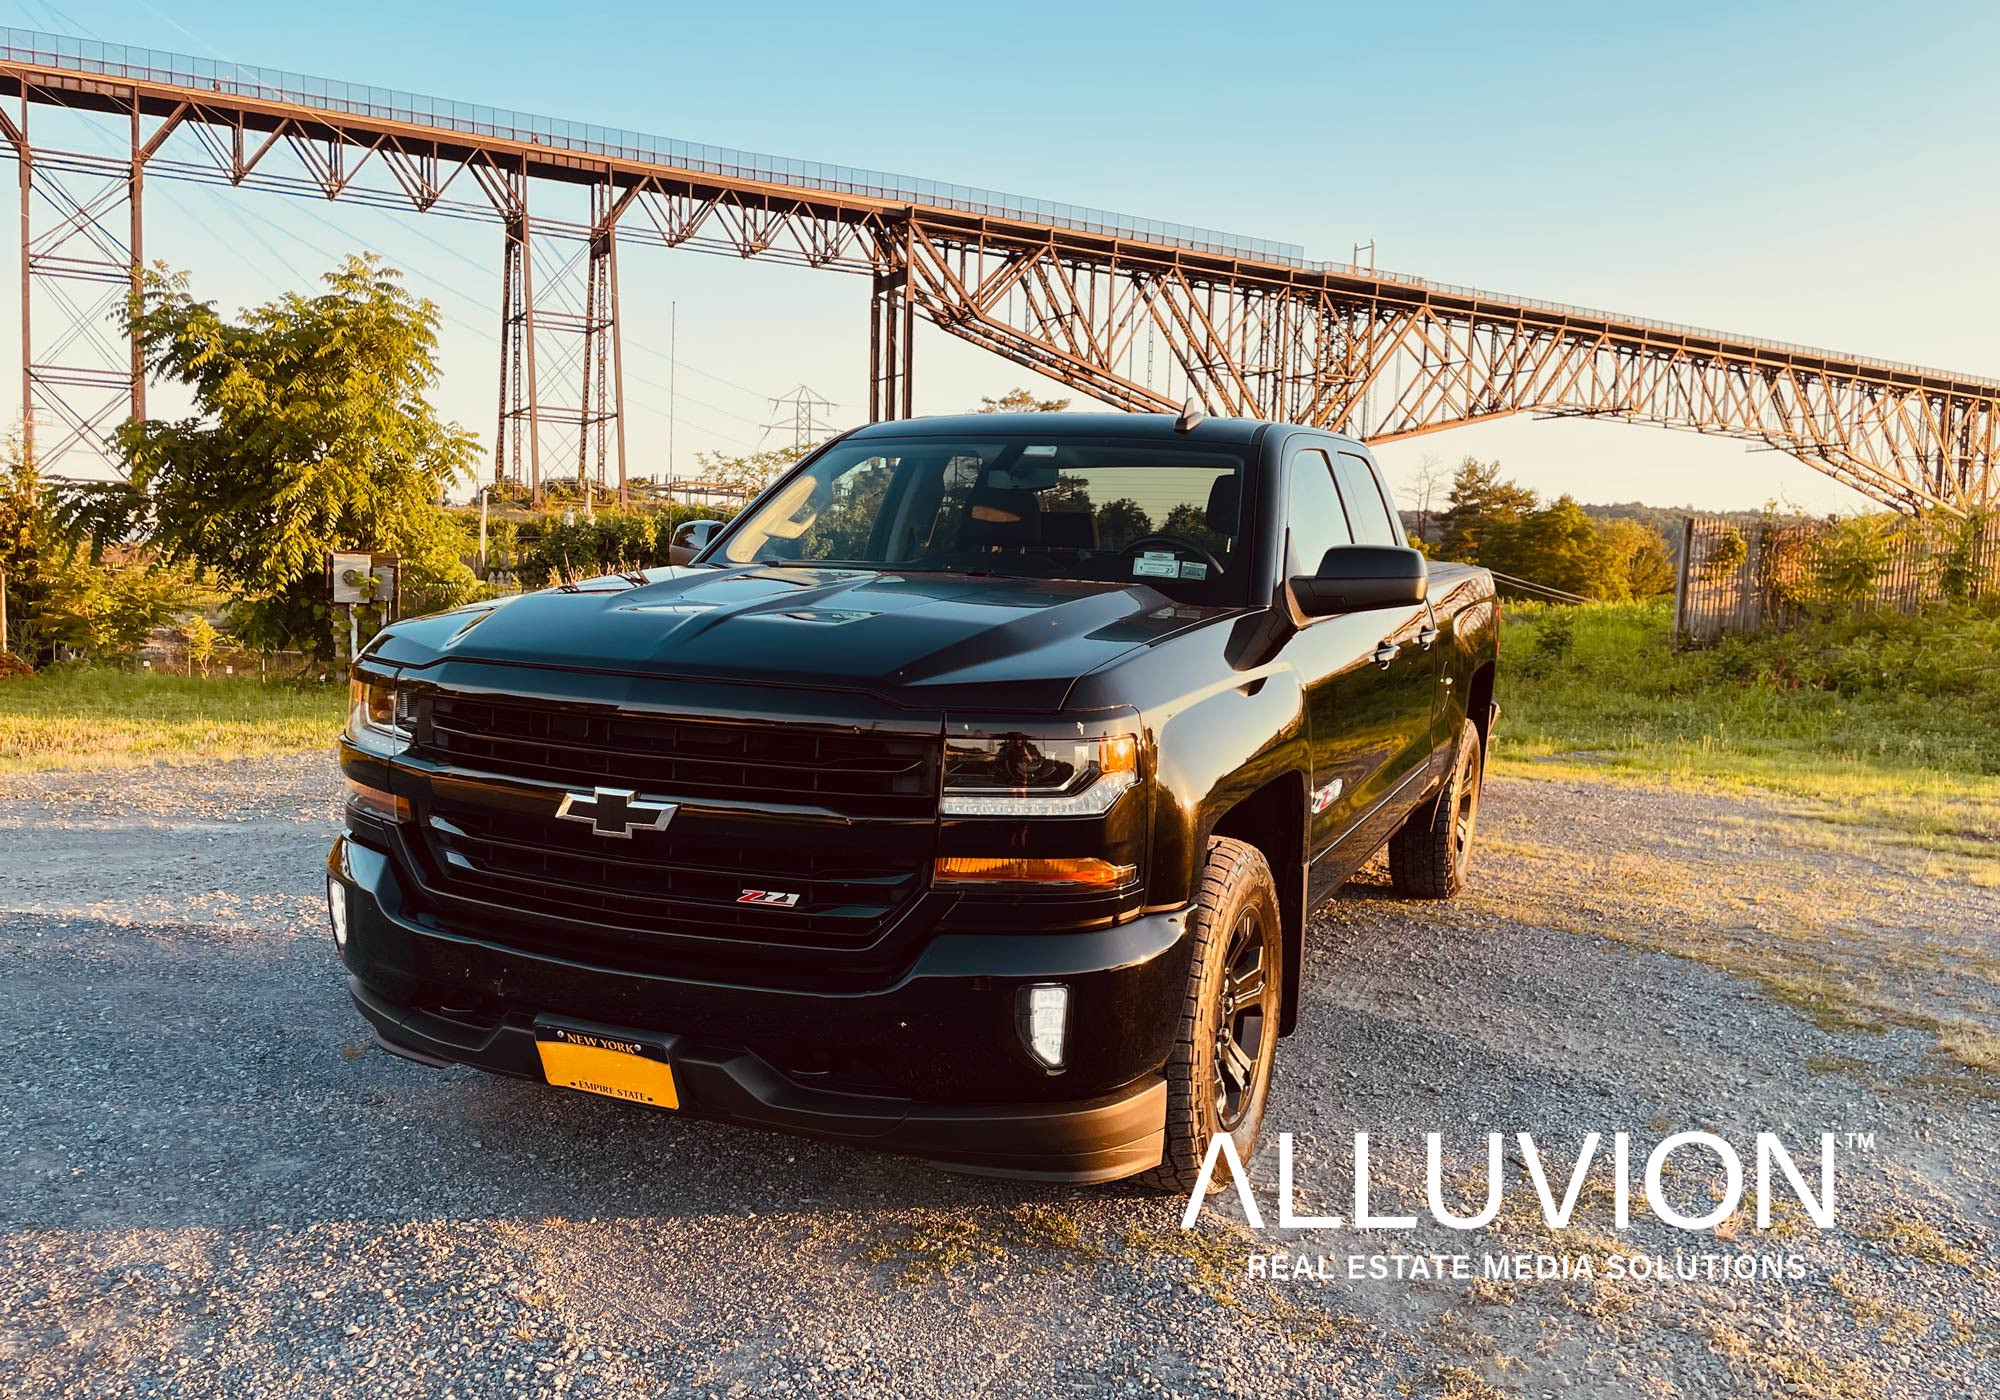 Renting a Chevrolet Silverado Truck on Turo is the Best Way to Experience Hudson Valley – Presented by Alluvion Vacations